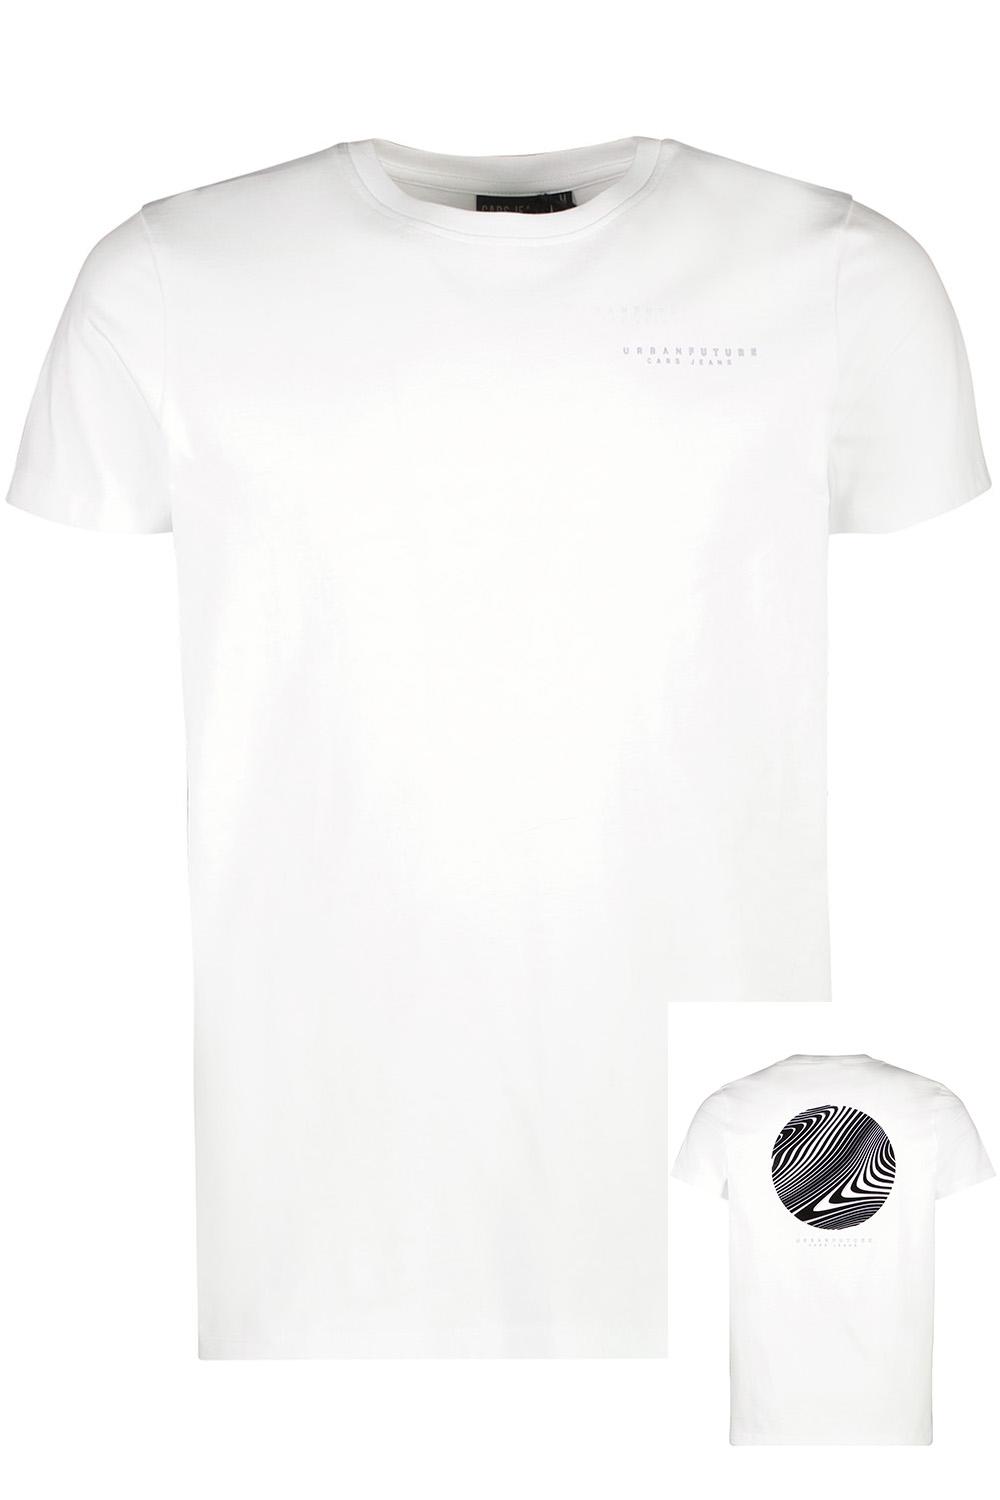 heden Lee opgroeien port ts 61256 cars t-shirt white